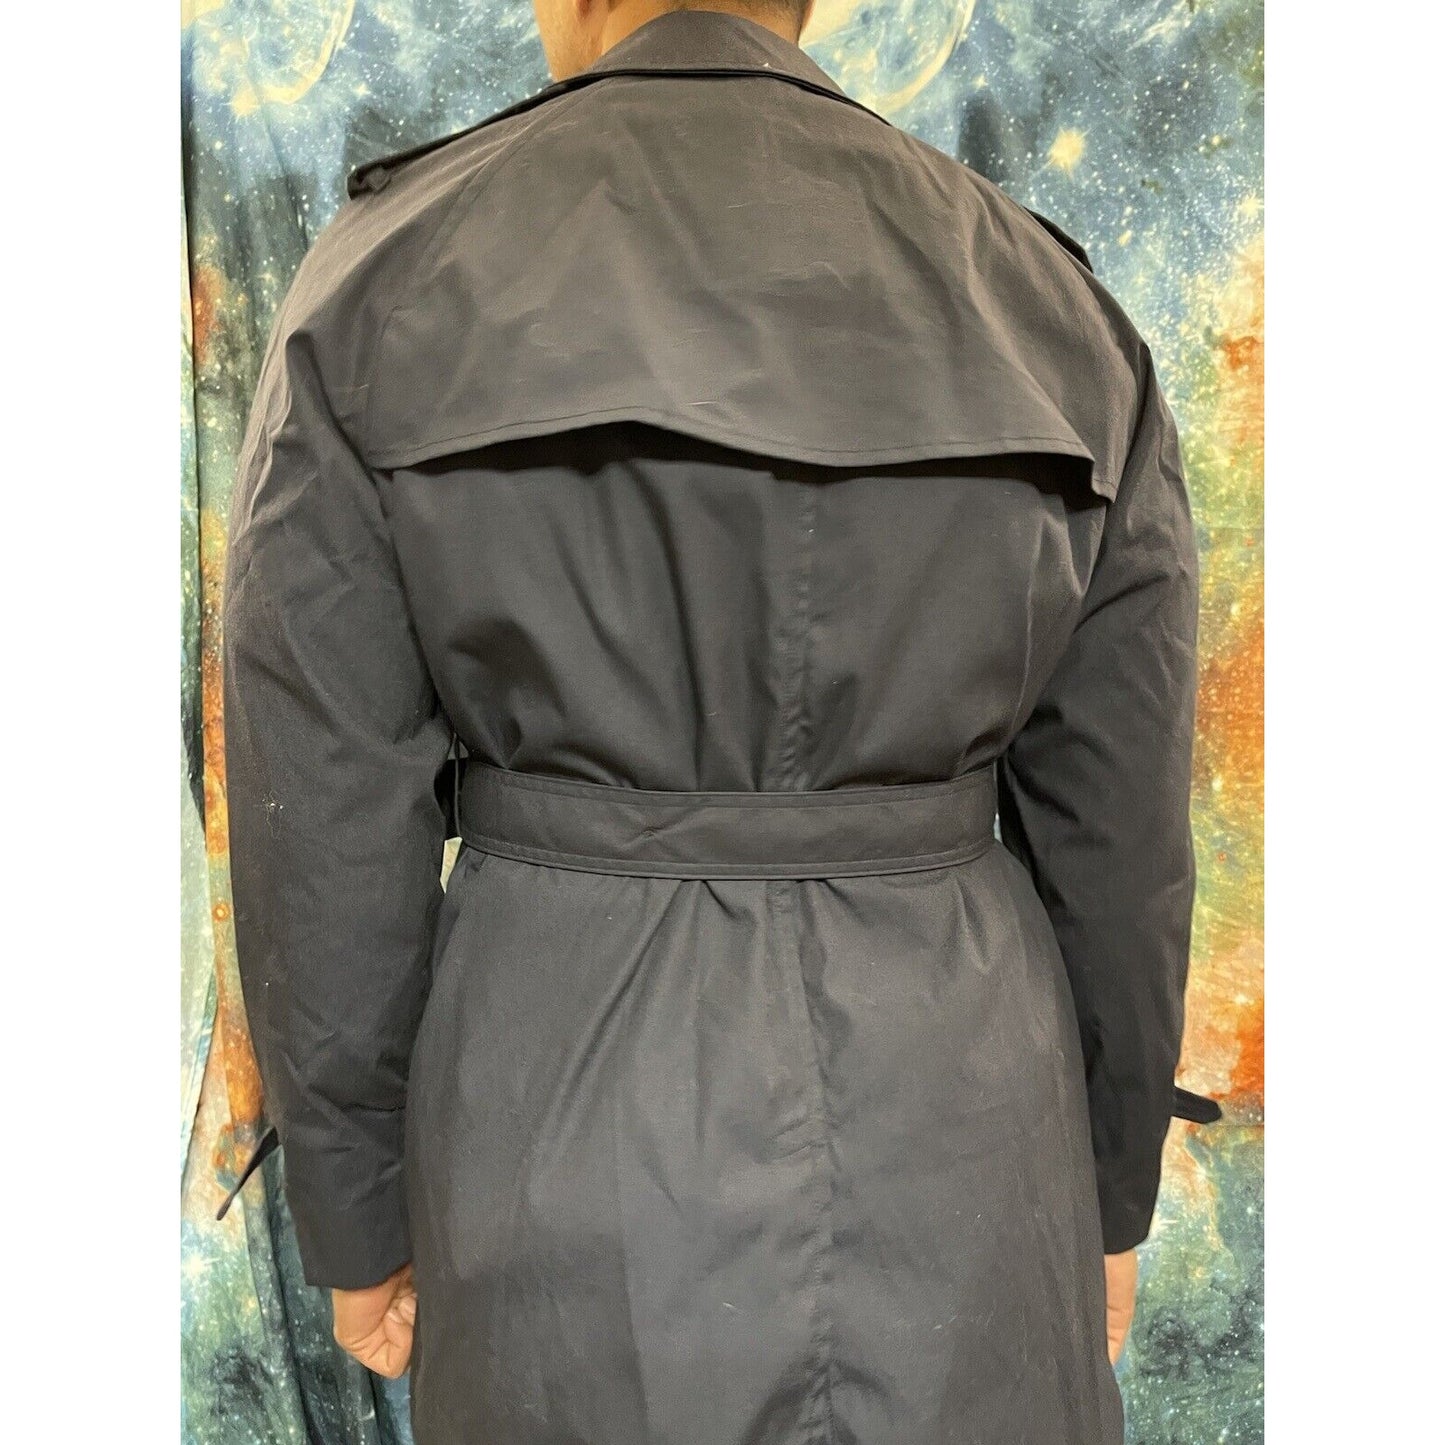 Air Force Dress Blues Trenchcoat with liner 40R Dark Blue